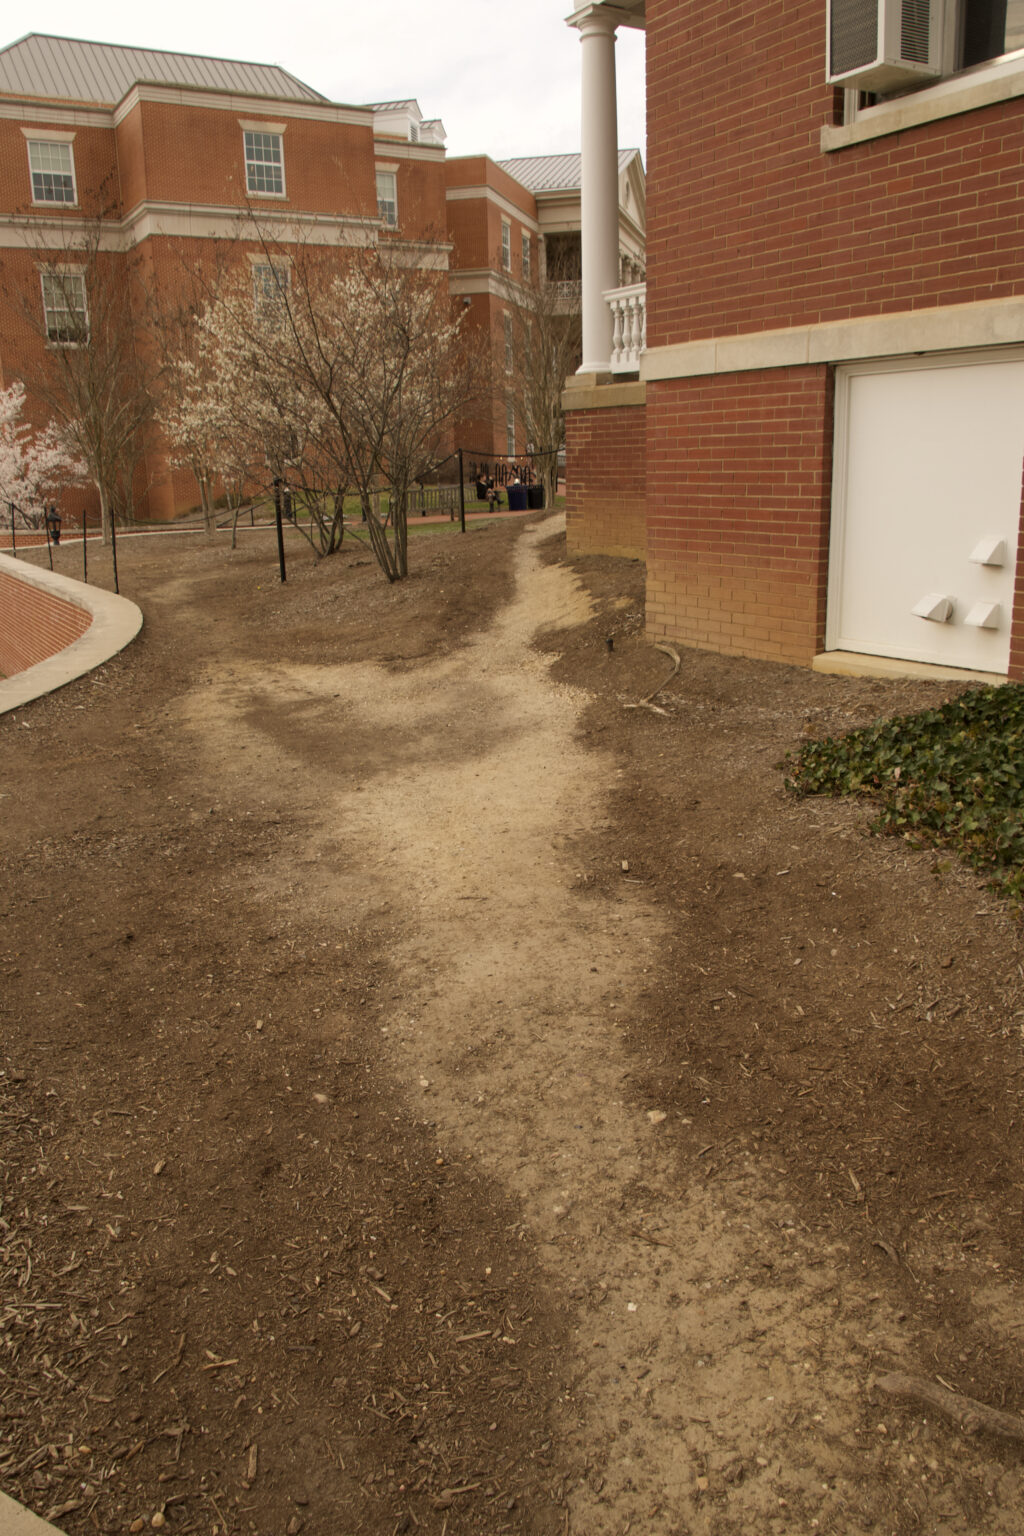 A dirt path leads to the rest of campus walk.